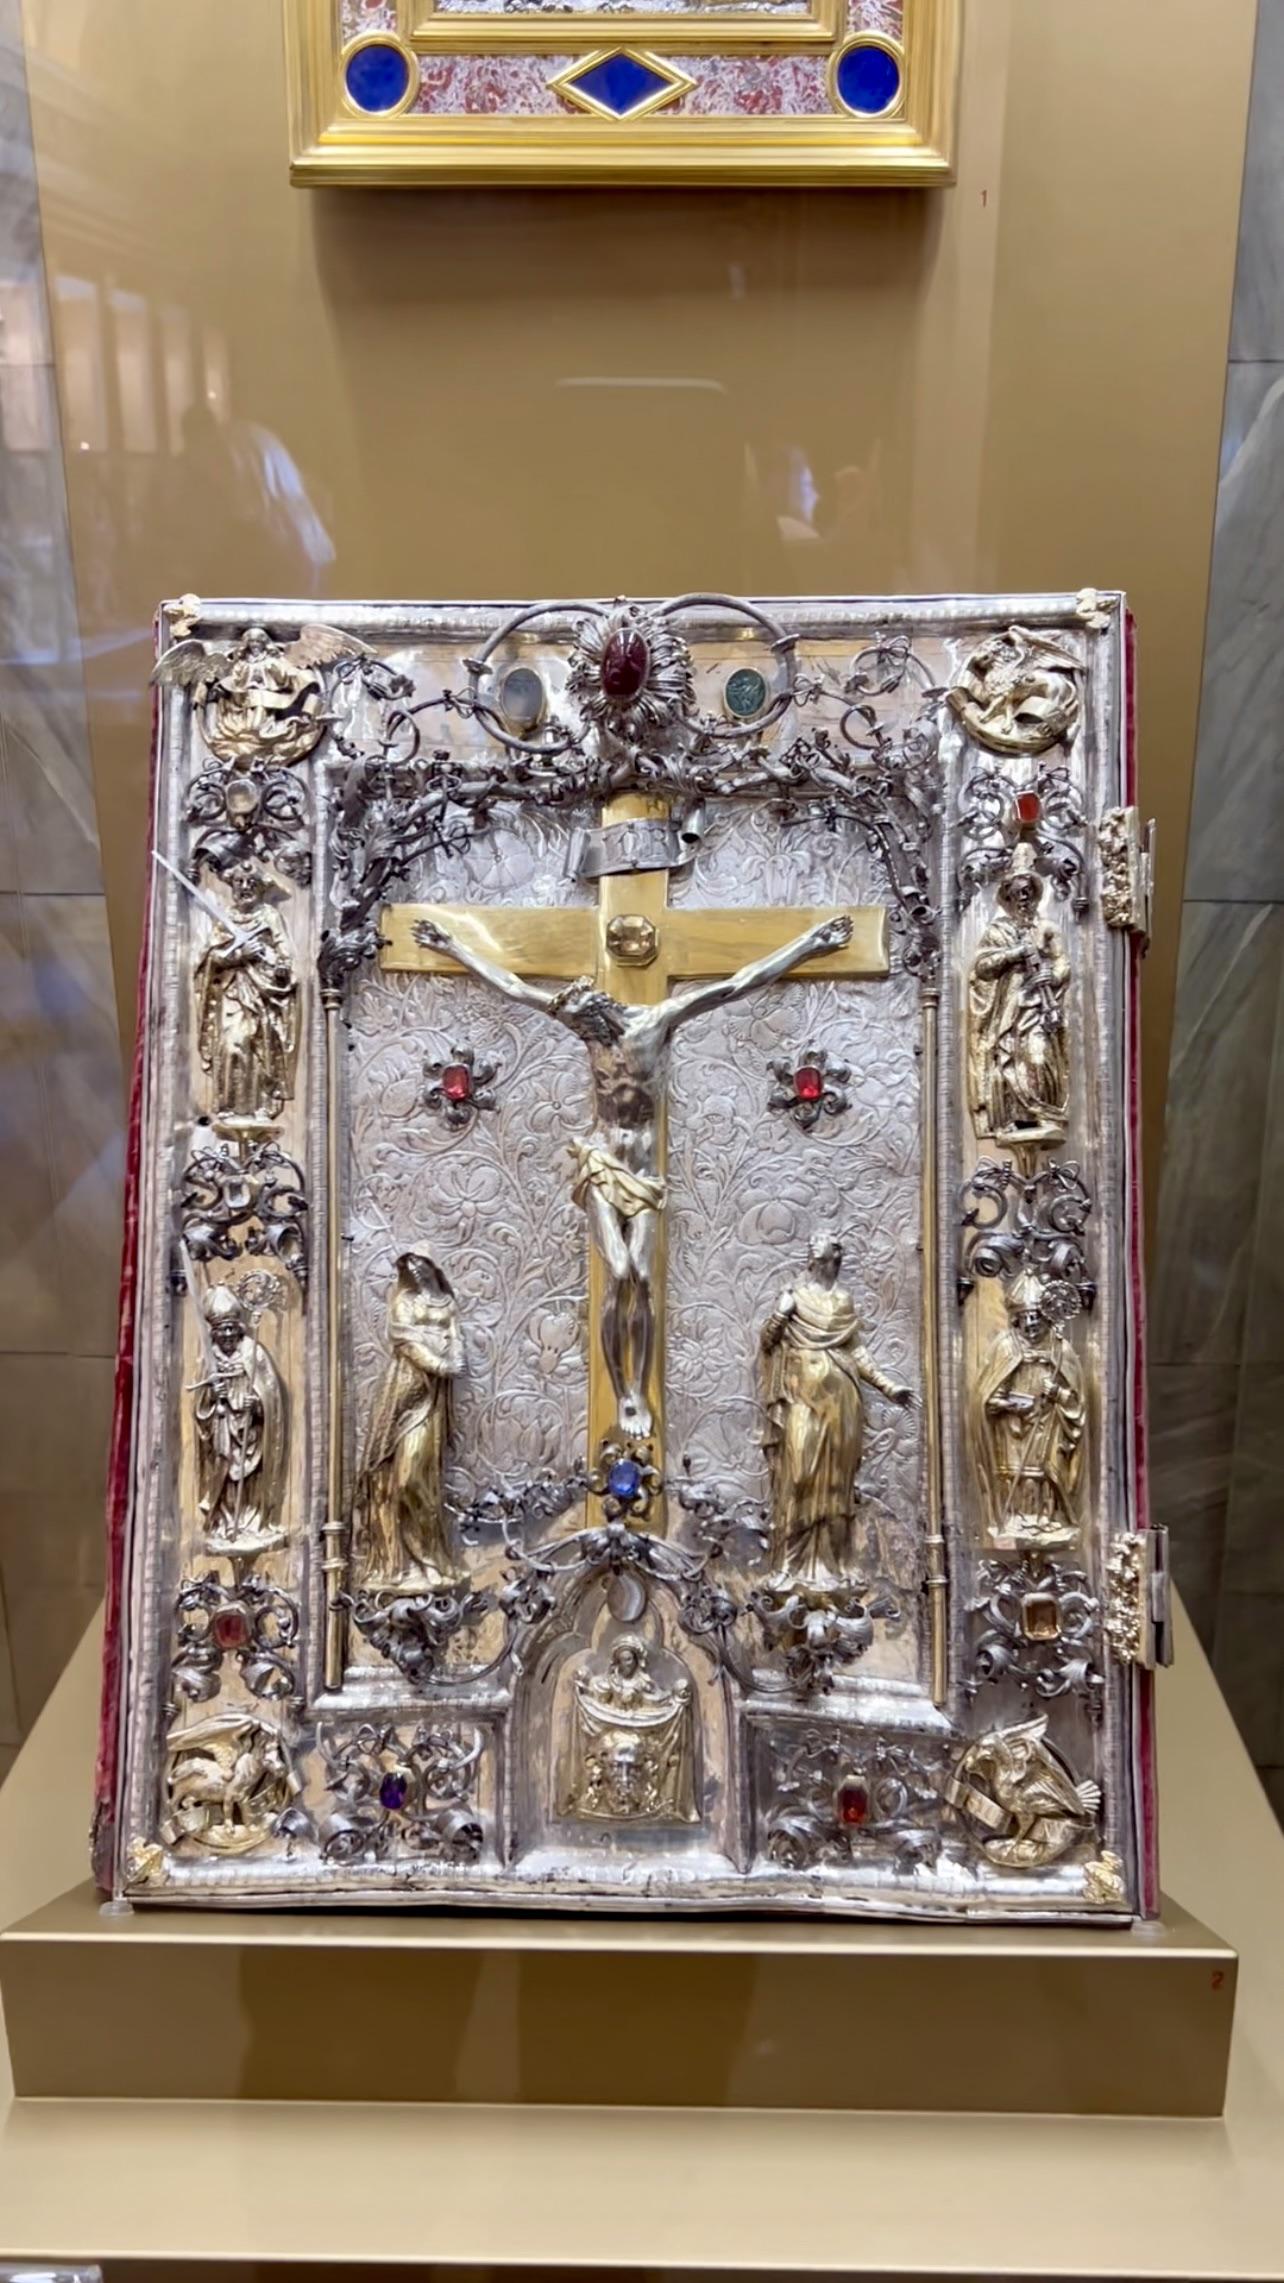 A 16th Century Bible held behind a glass case at The Vatican.jpeg